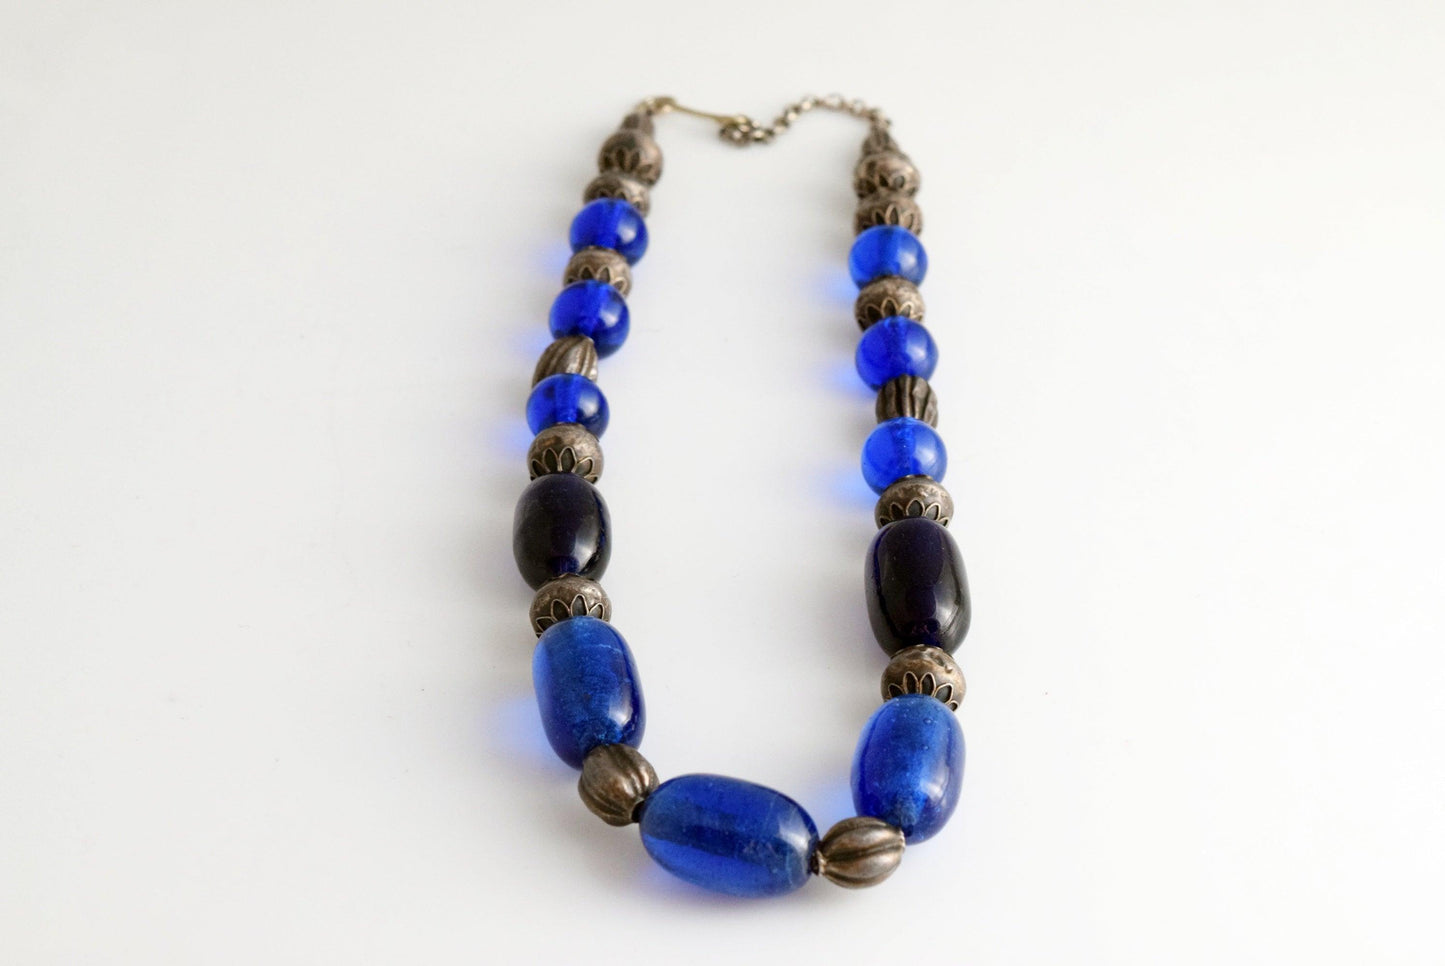 Vintage Necklace with Silver and Blue Glass Beads - Anteeka